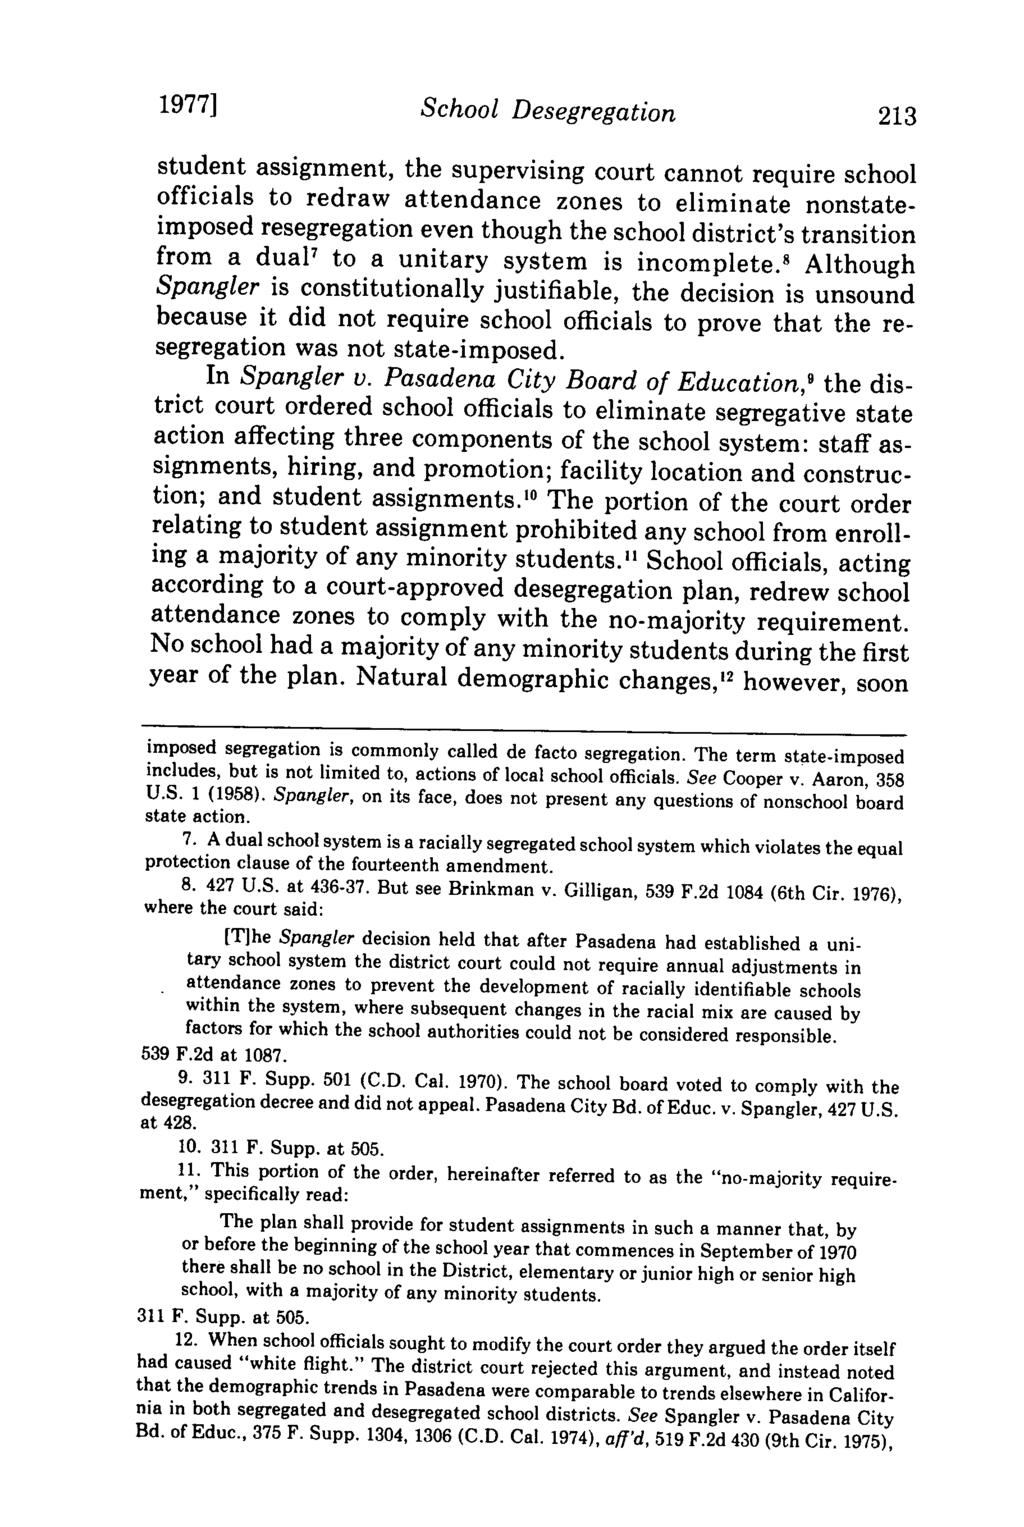 19771 School Desegregation student assignment, the supervising court cannot require school officials to redraw attendance zones to eliminate nonstateimposed resegregation even though the school